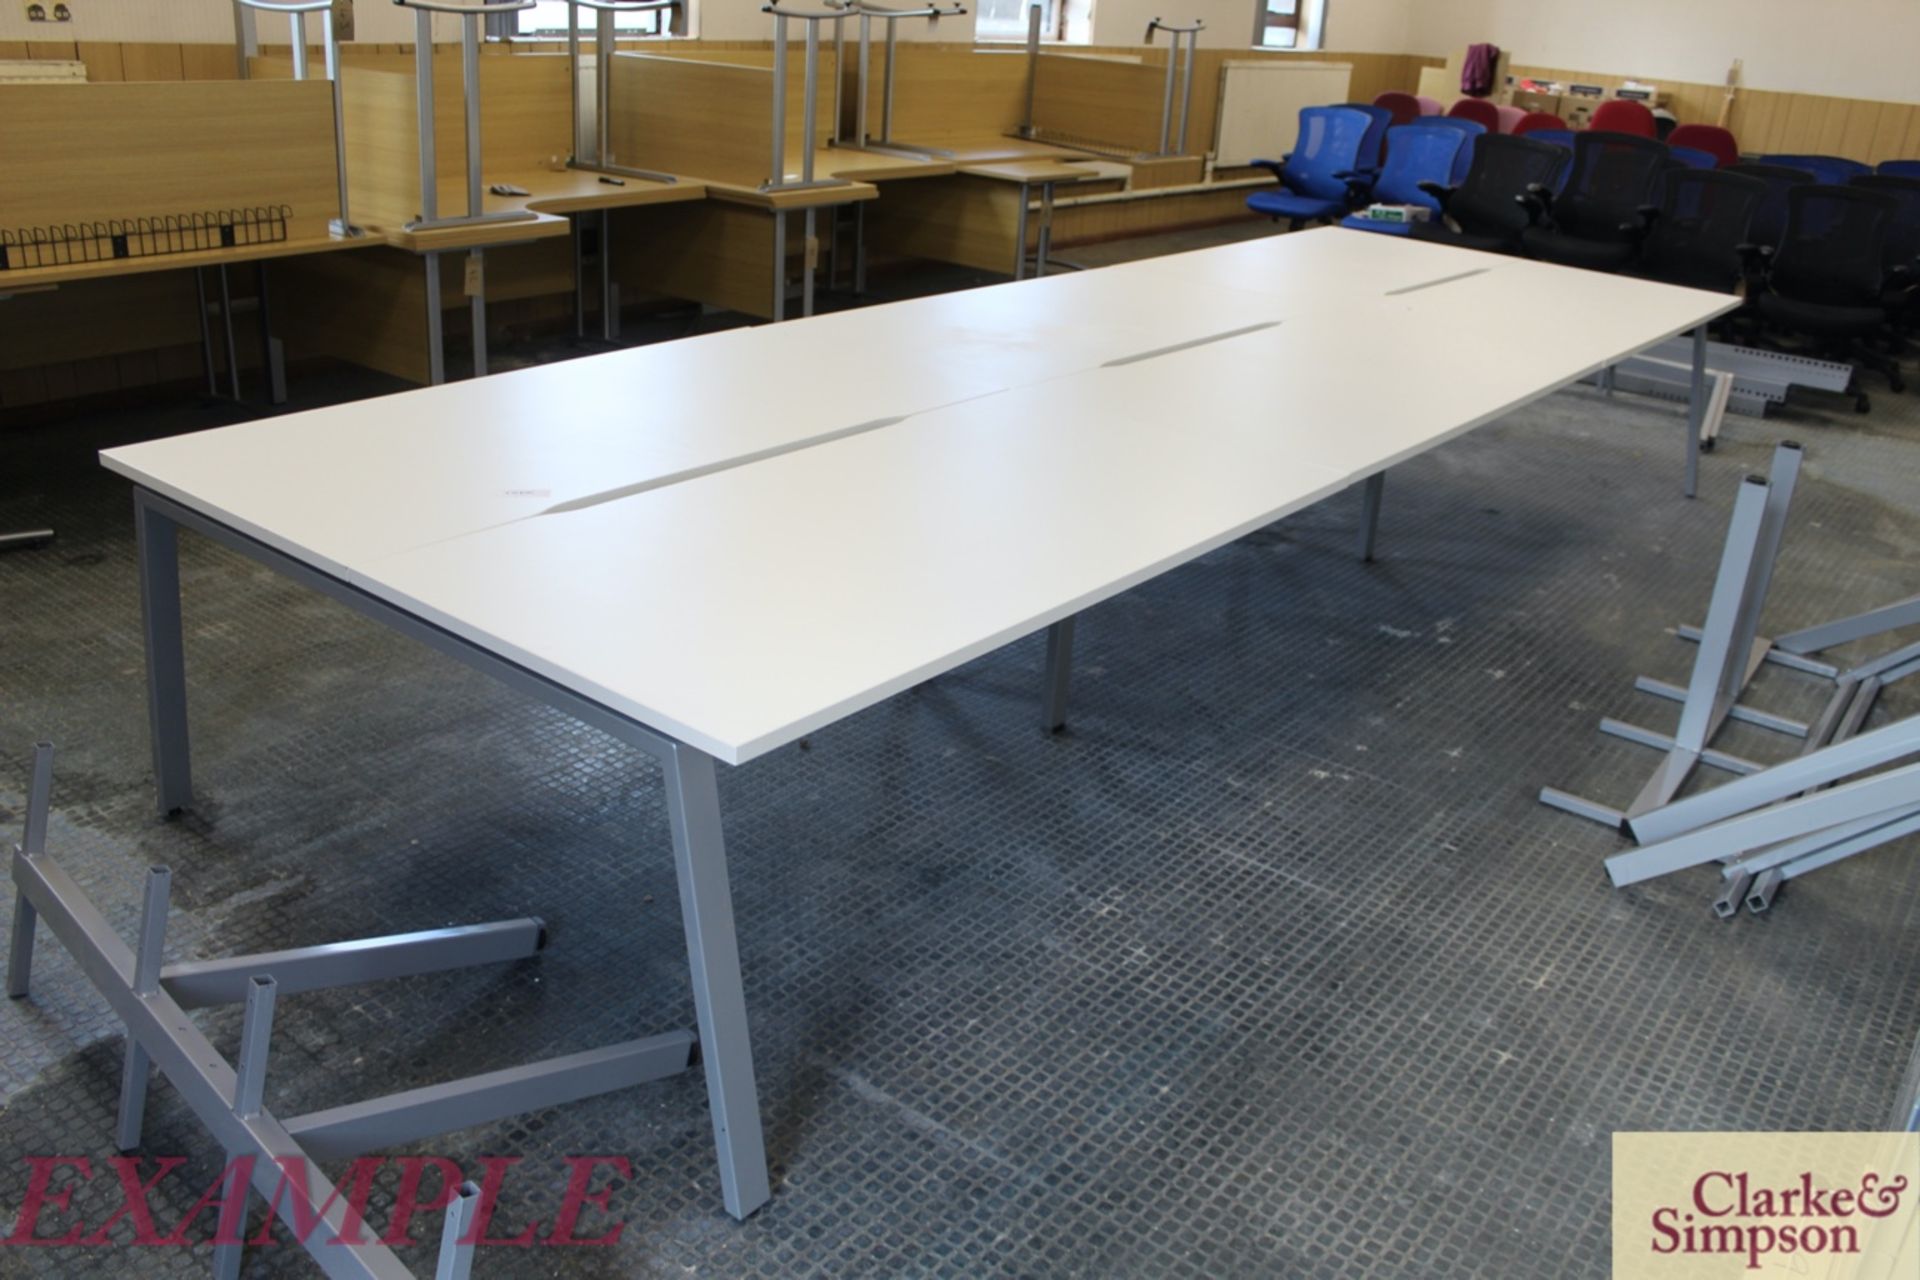 4.8m x 1.6m back-to-back sectional bench desk. Com - Image 6 of 12